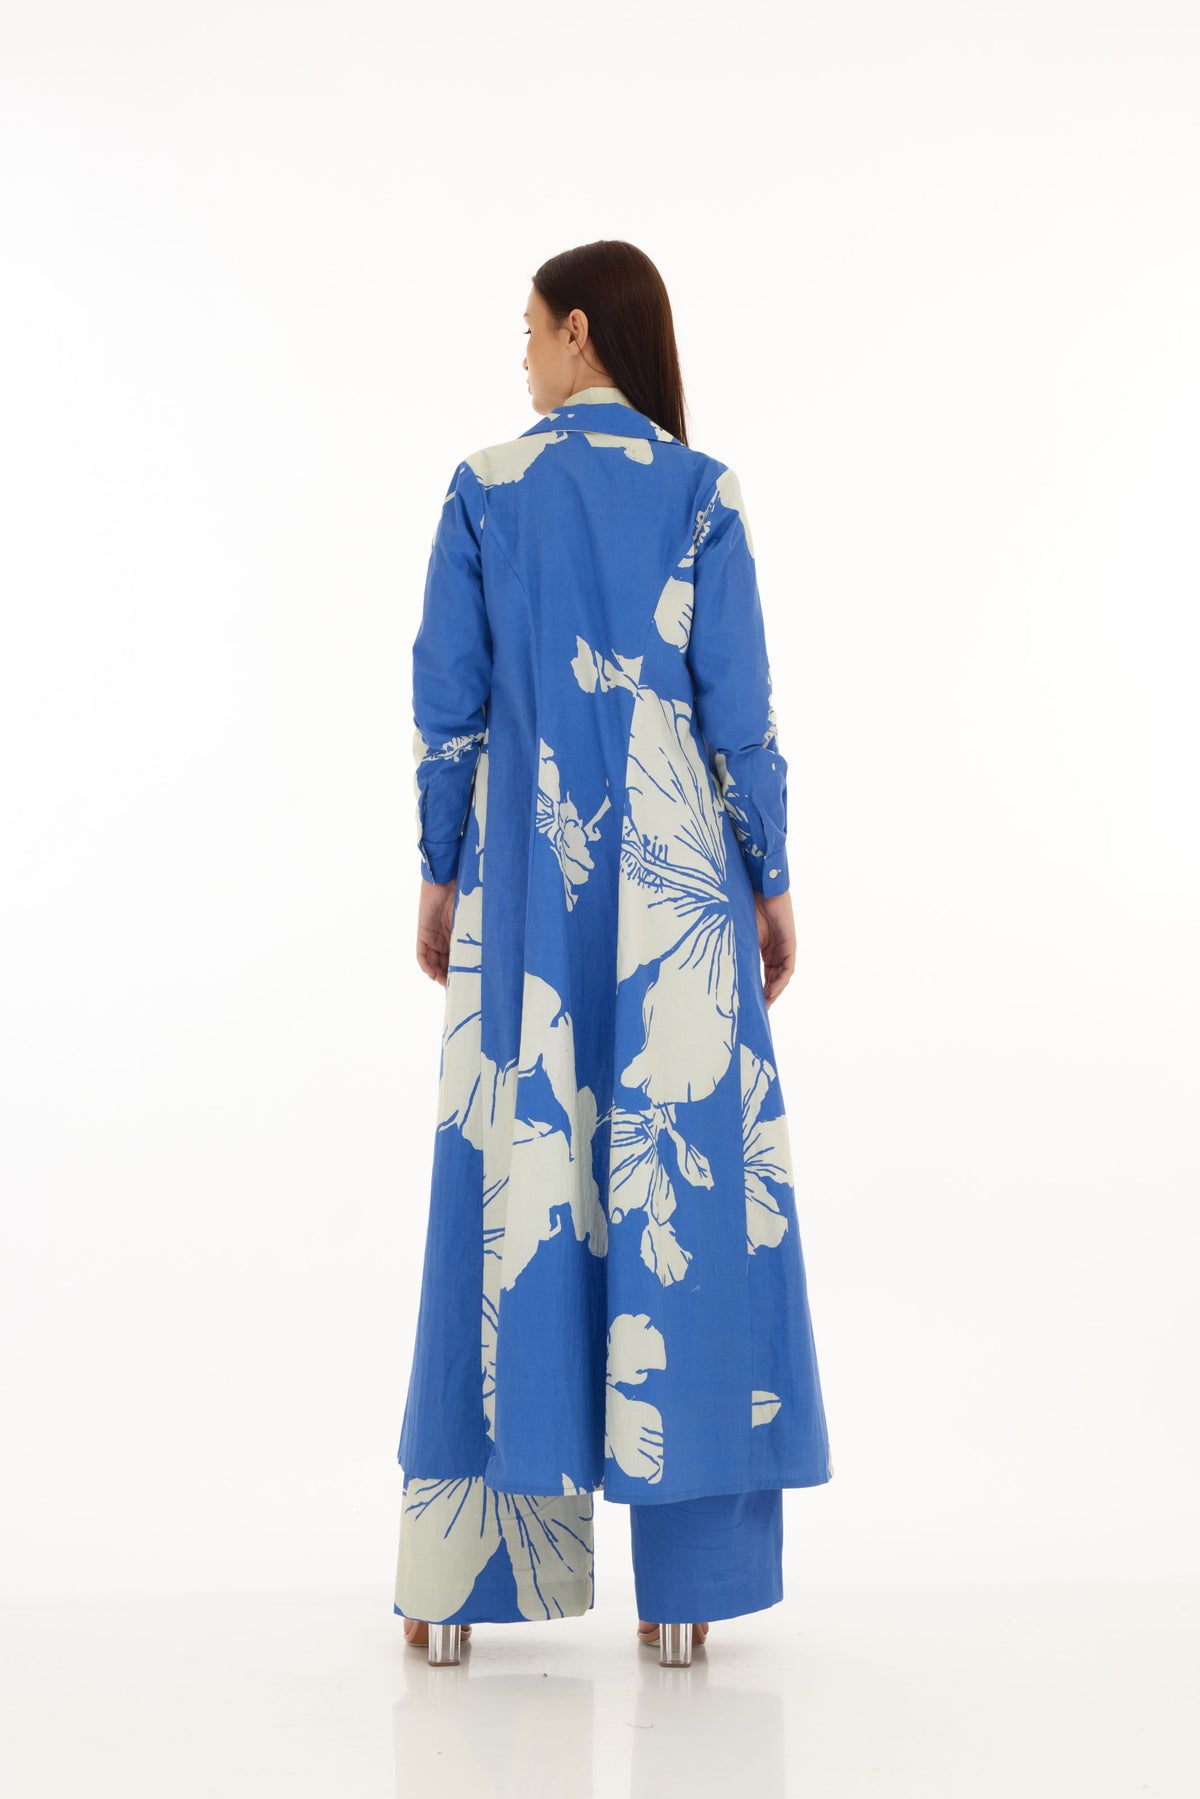 BLUE AND WHITE FLORAL CAPE